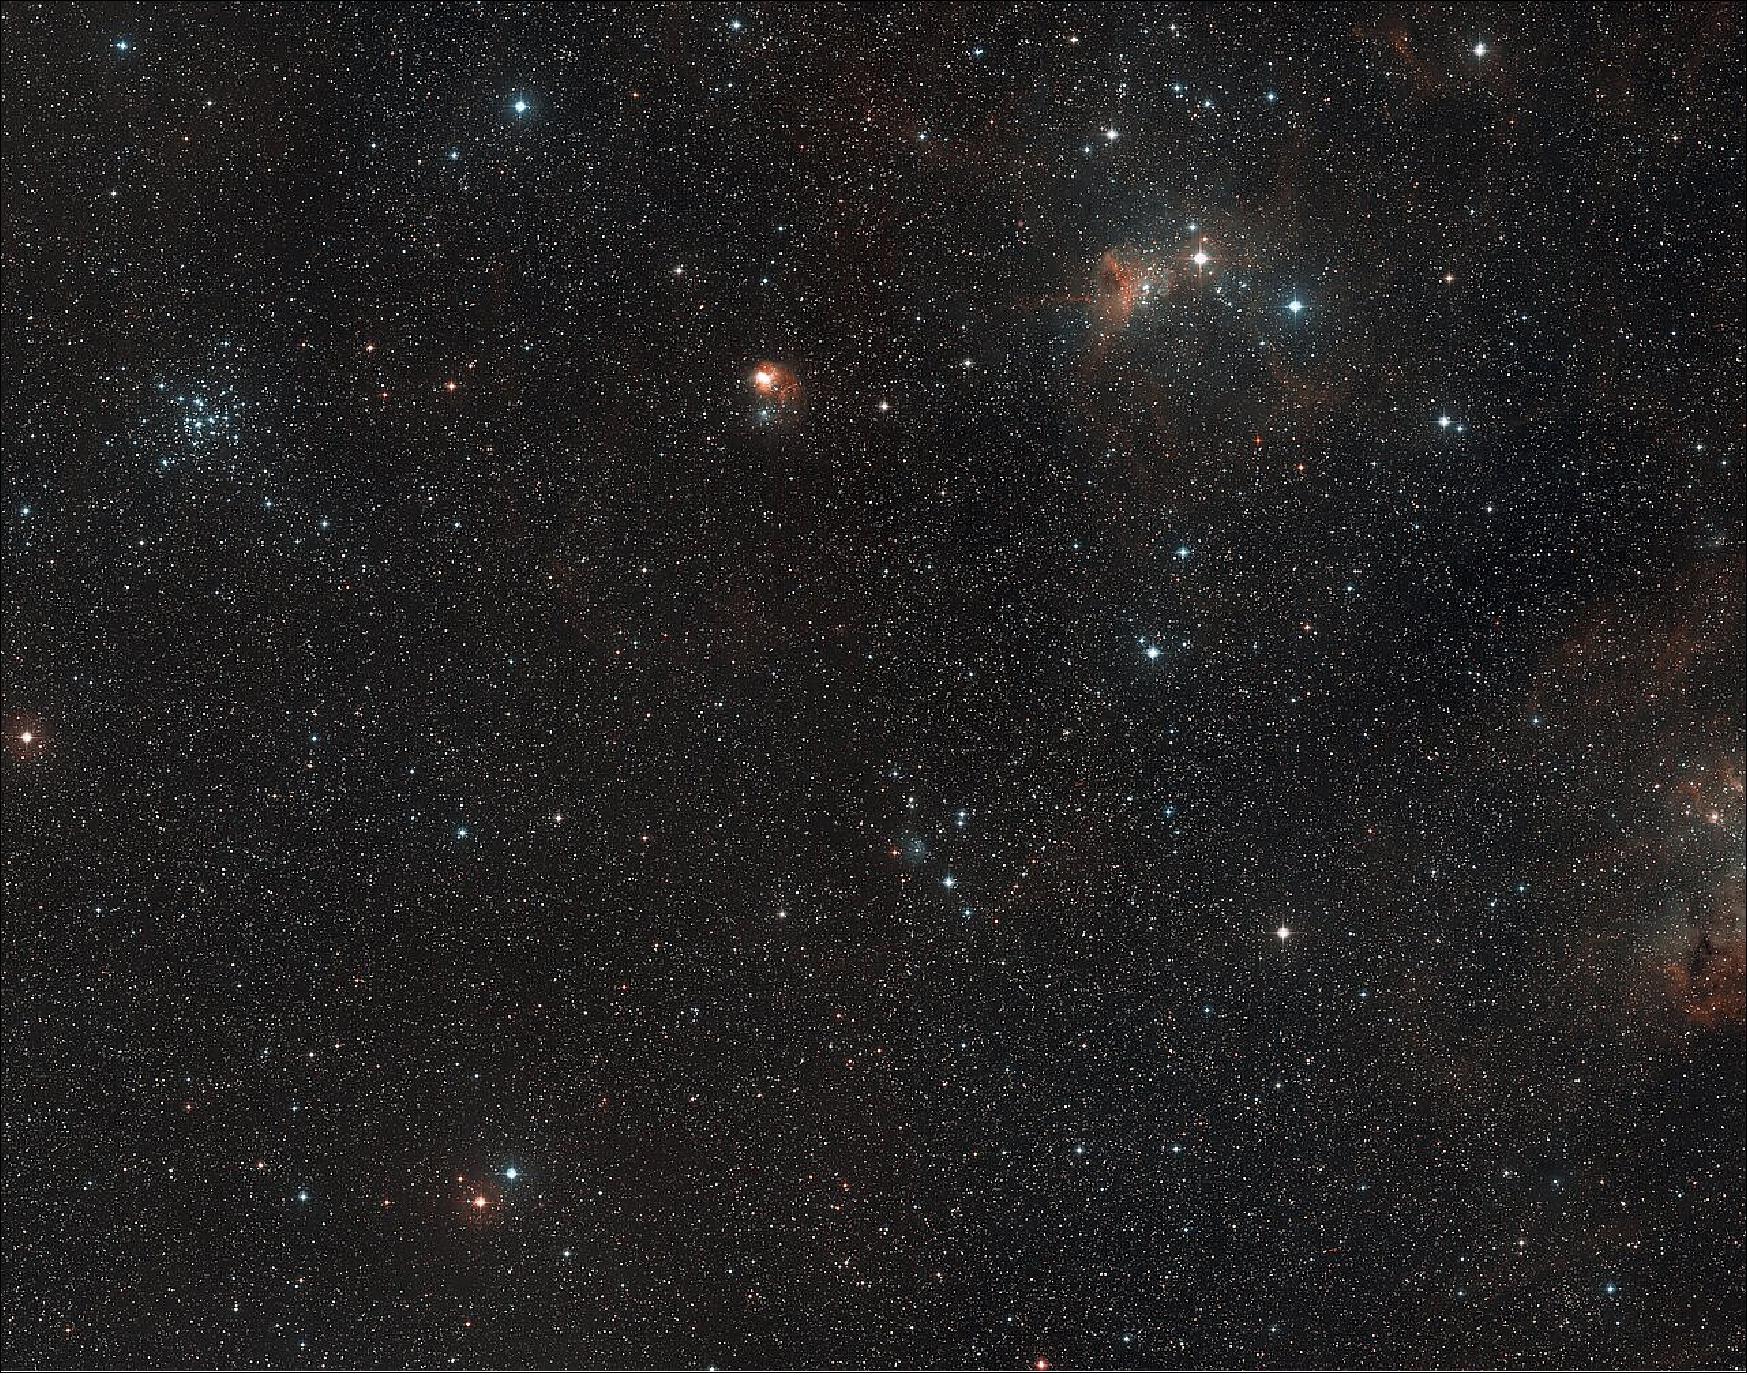 Figure 48: This wide-field view shows the region of the sky, in the constellation of Auriga, where the star-forming region AFGL 5142 is located. This view was created from images forming part of the Digitized Sky Survey 2 (image credit: ESO/Digitized Sky Survey 2. Acknowledgement: Davide De Martin)